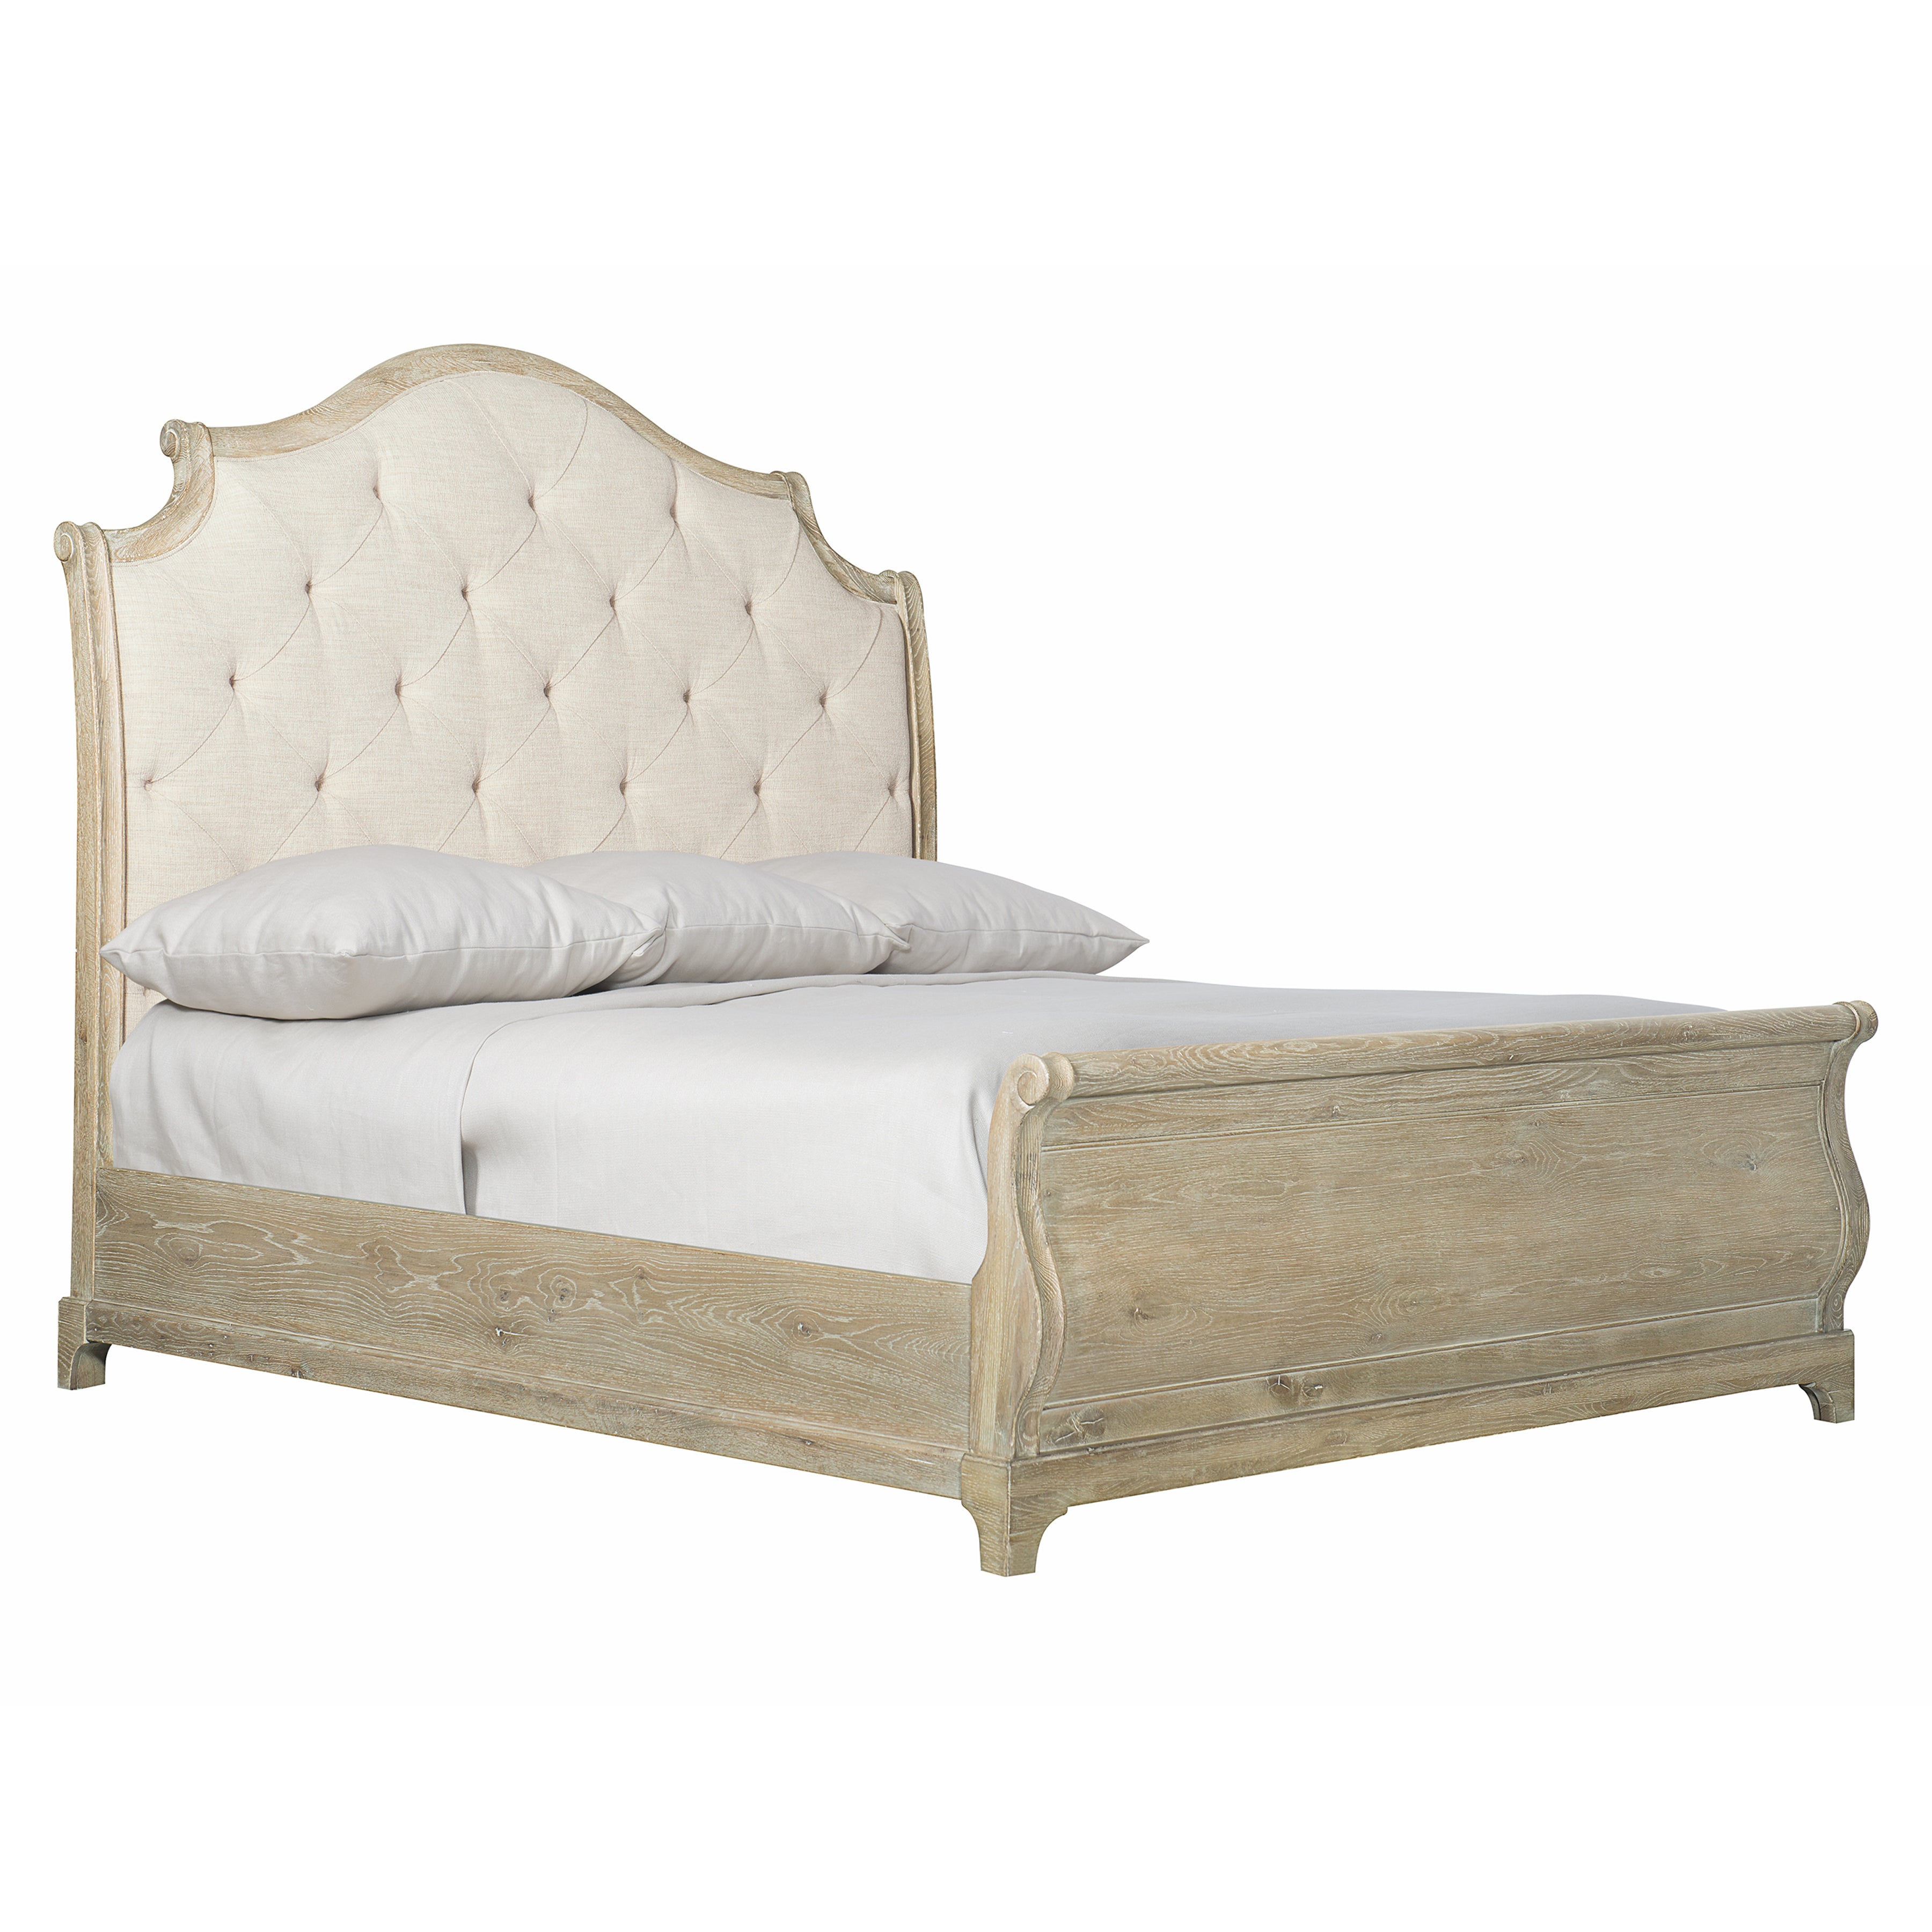 Rustic Patina Upholstered King Sleigh Bed in Sand Finish